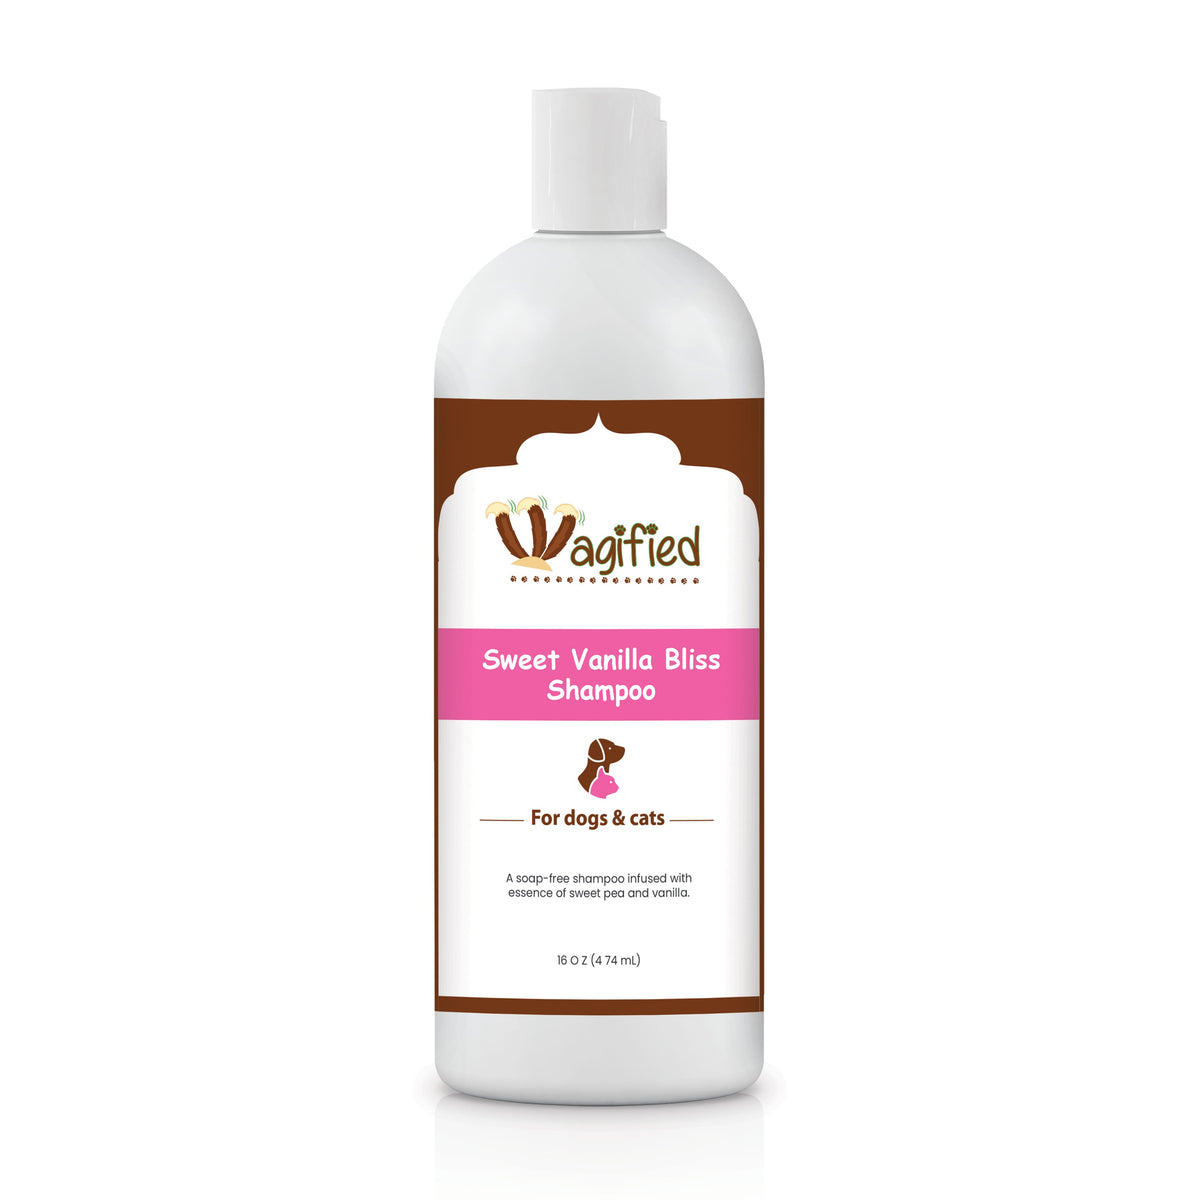 Wagified Shampoo for Dogs and Cats, Sweet Vanilla Bliss, 16 oz